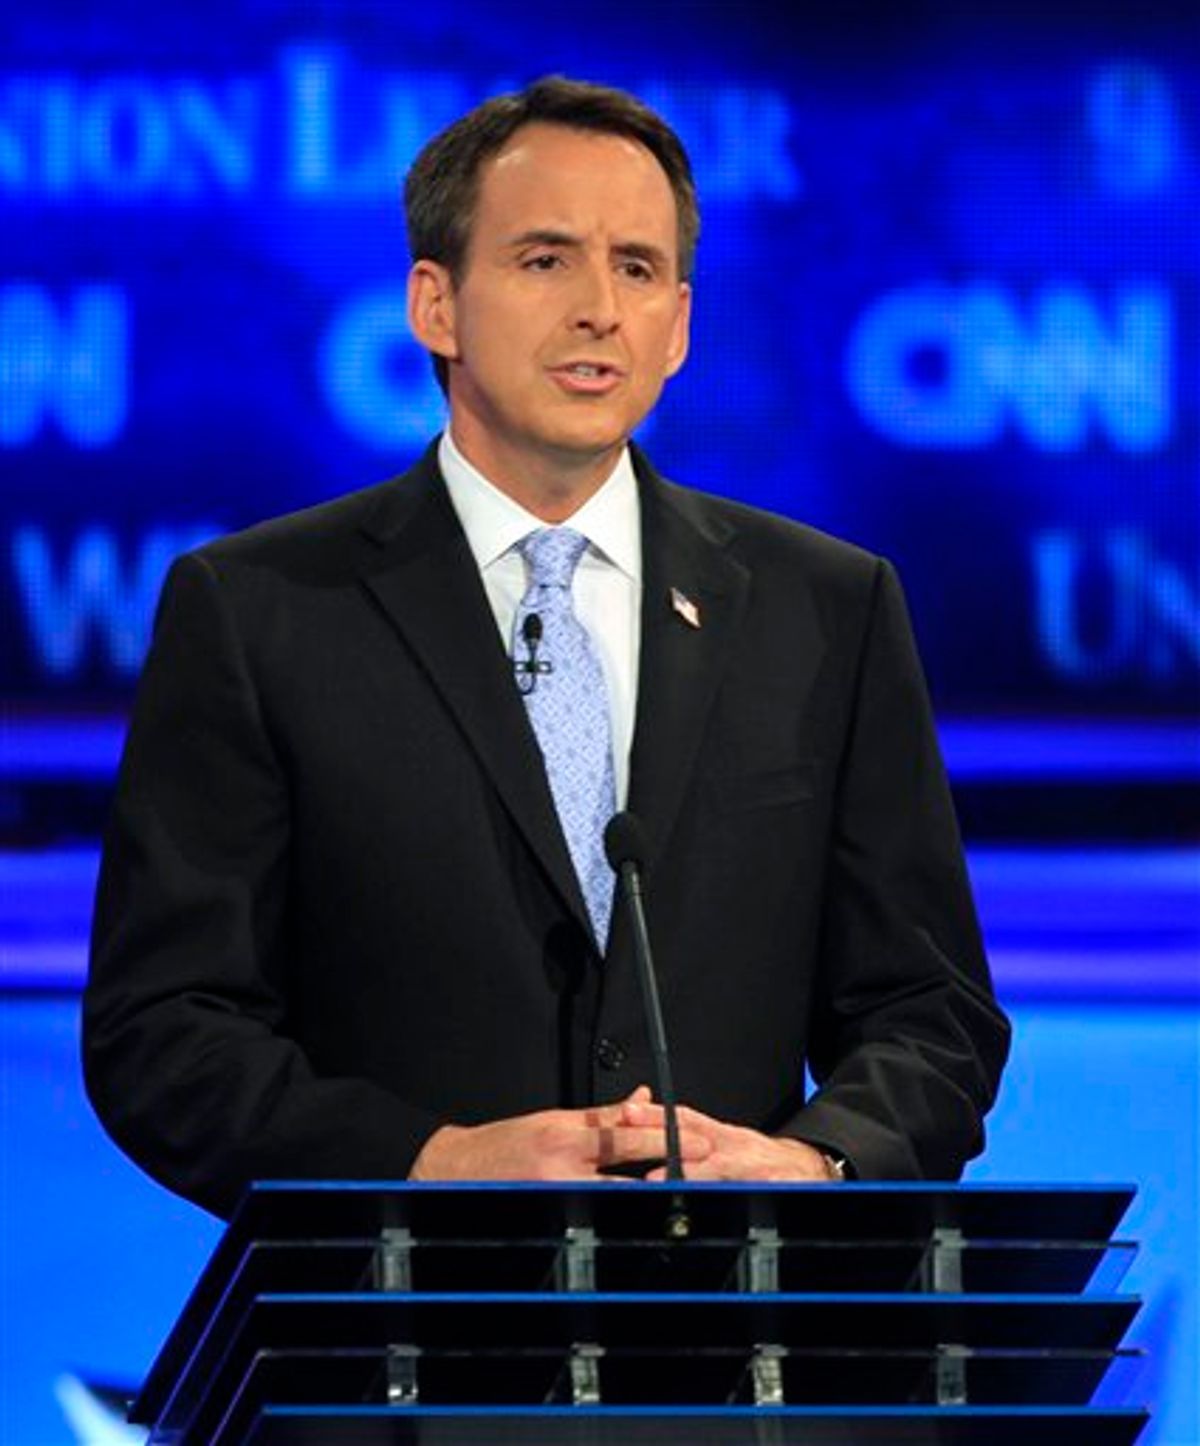 Former Minnesota Gov. Tim Pawlenty answers a question during the first New Hampshire Republican presidential debate at St. Anselm College in Manchester, N.H., Monday, June 13, 2011. (AP Photo/Jim Cole) (AP)